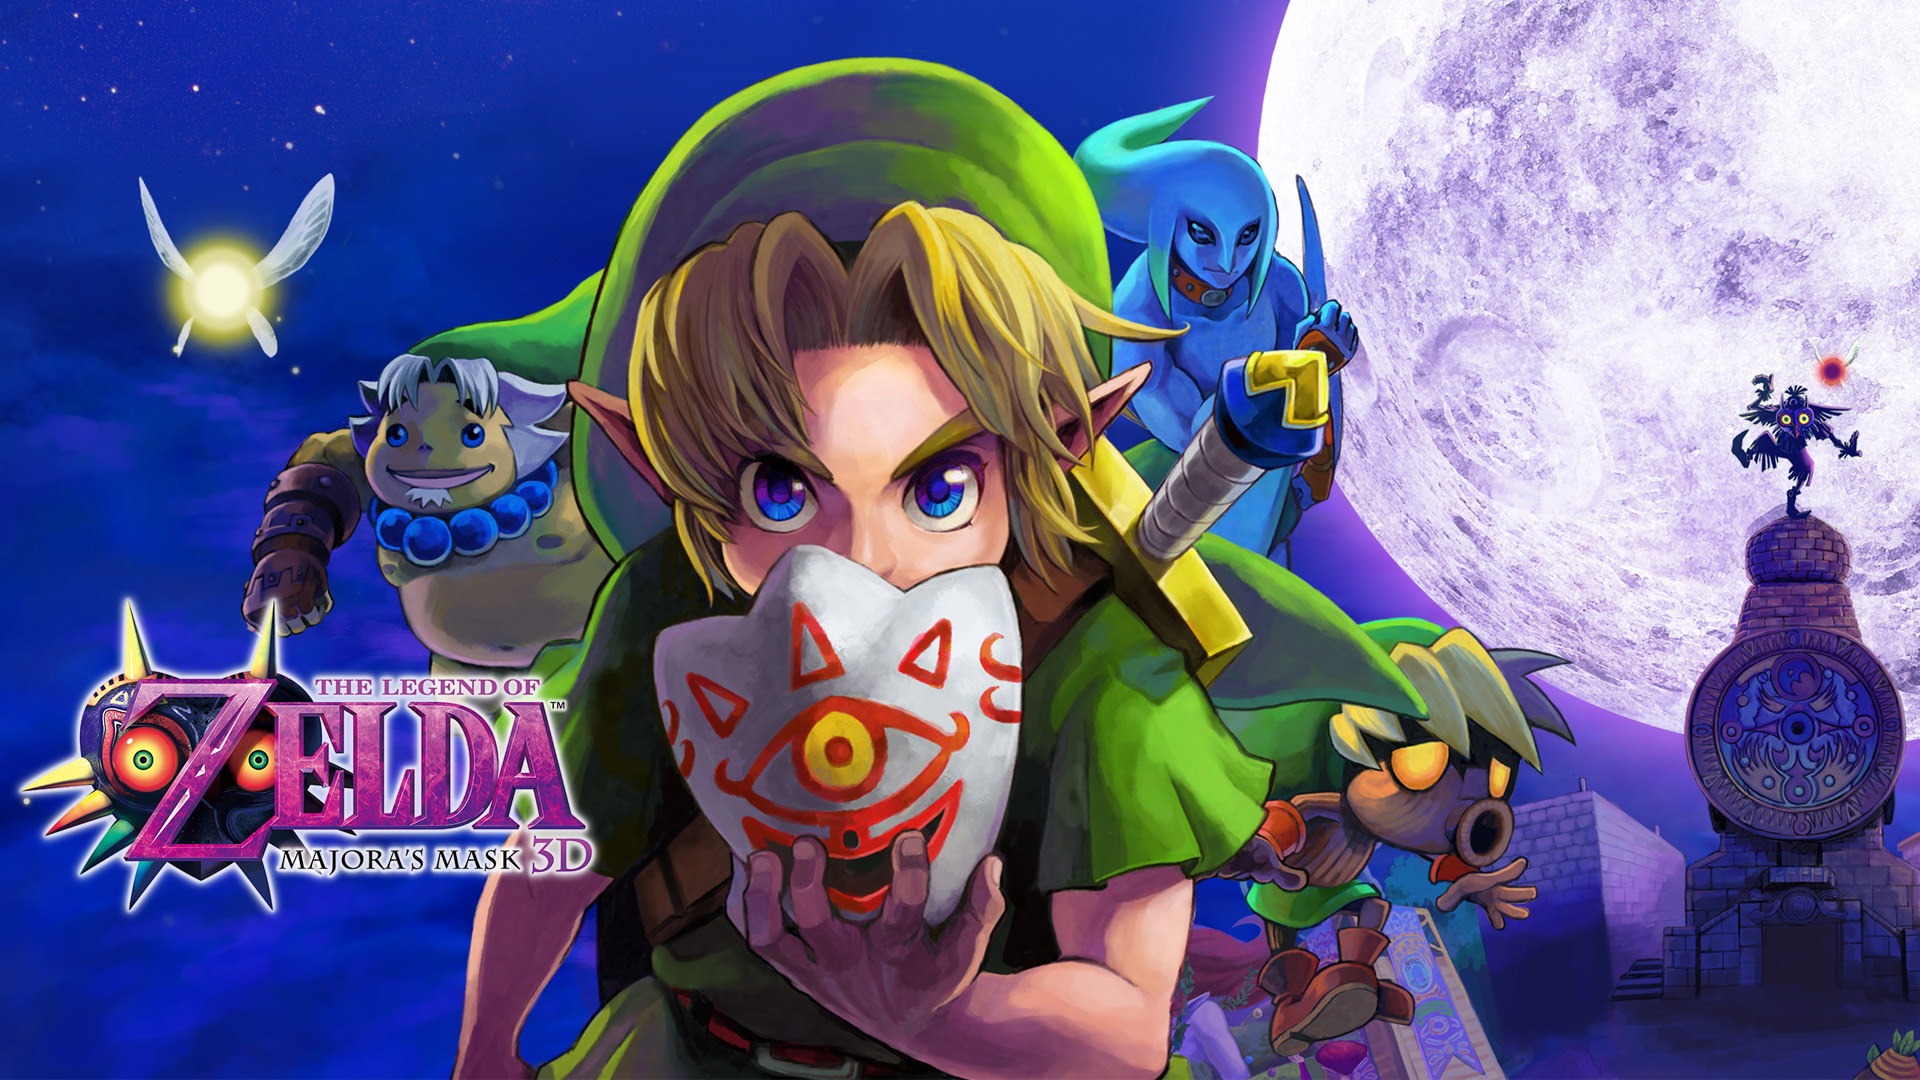 The Above Majora S Mask Wallpaper Are As Follows